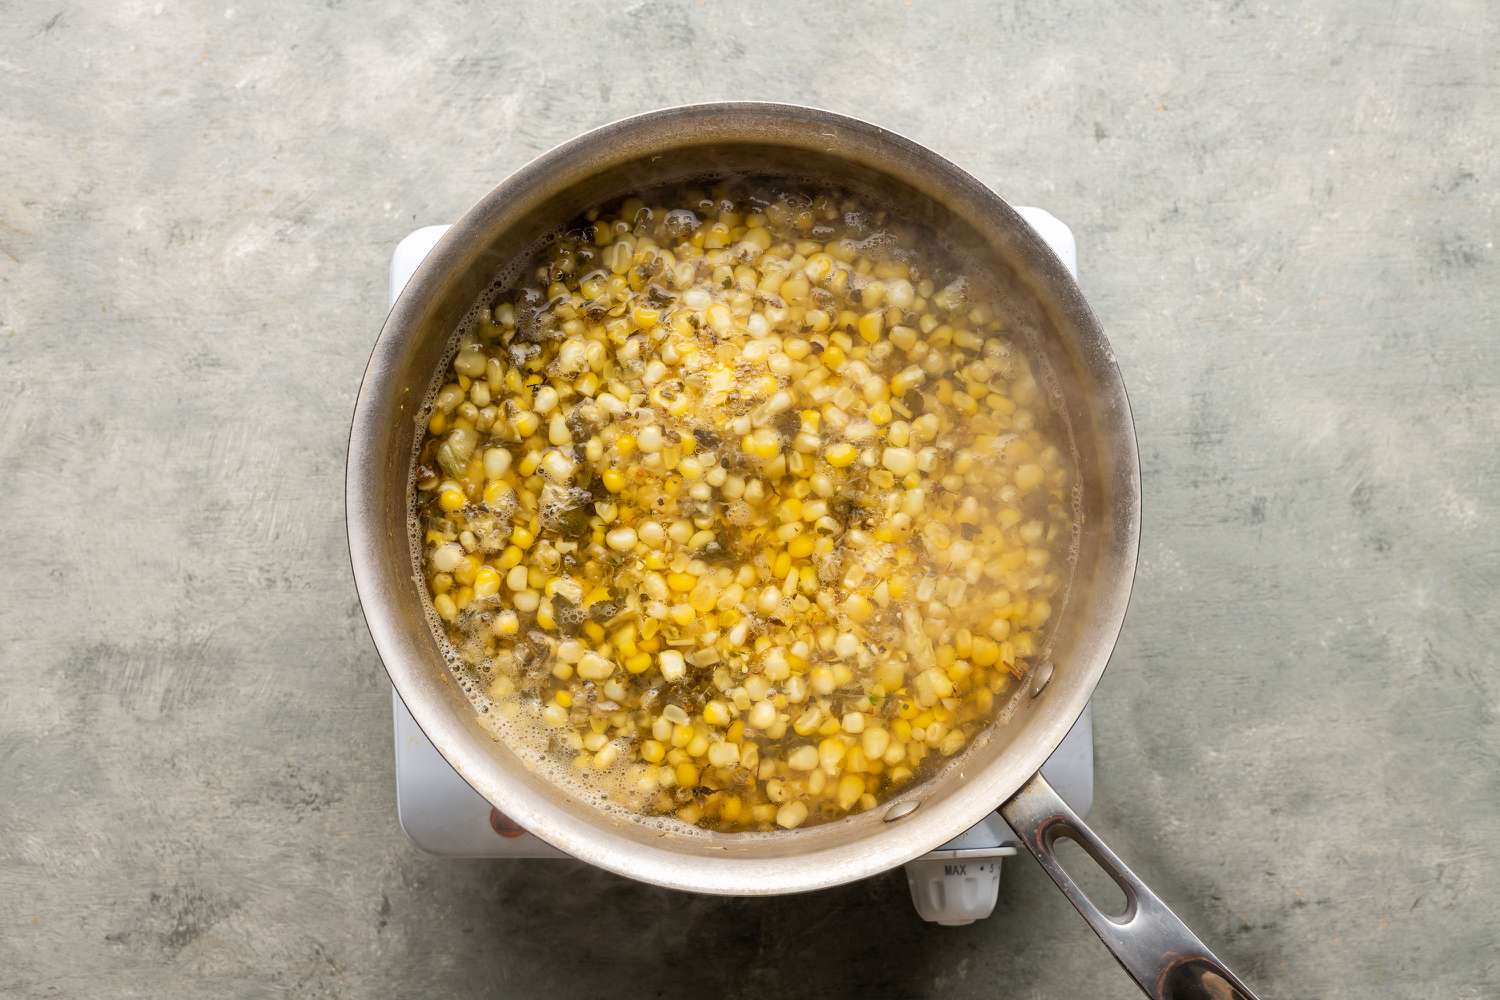 Corn, water, epazote leaves, and salt in a pot on the burner 